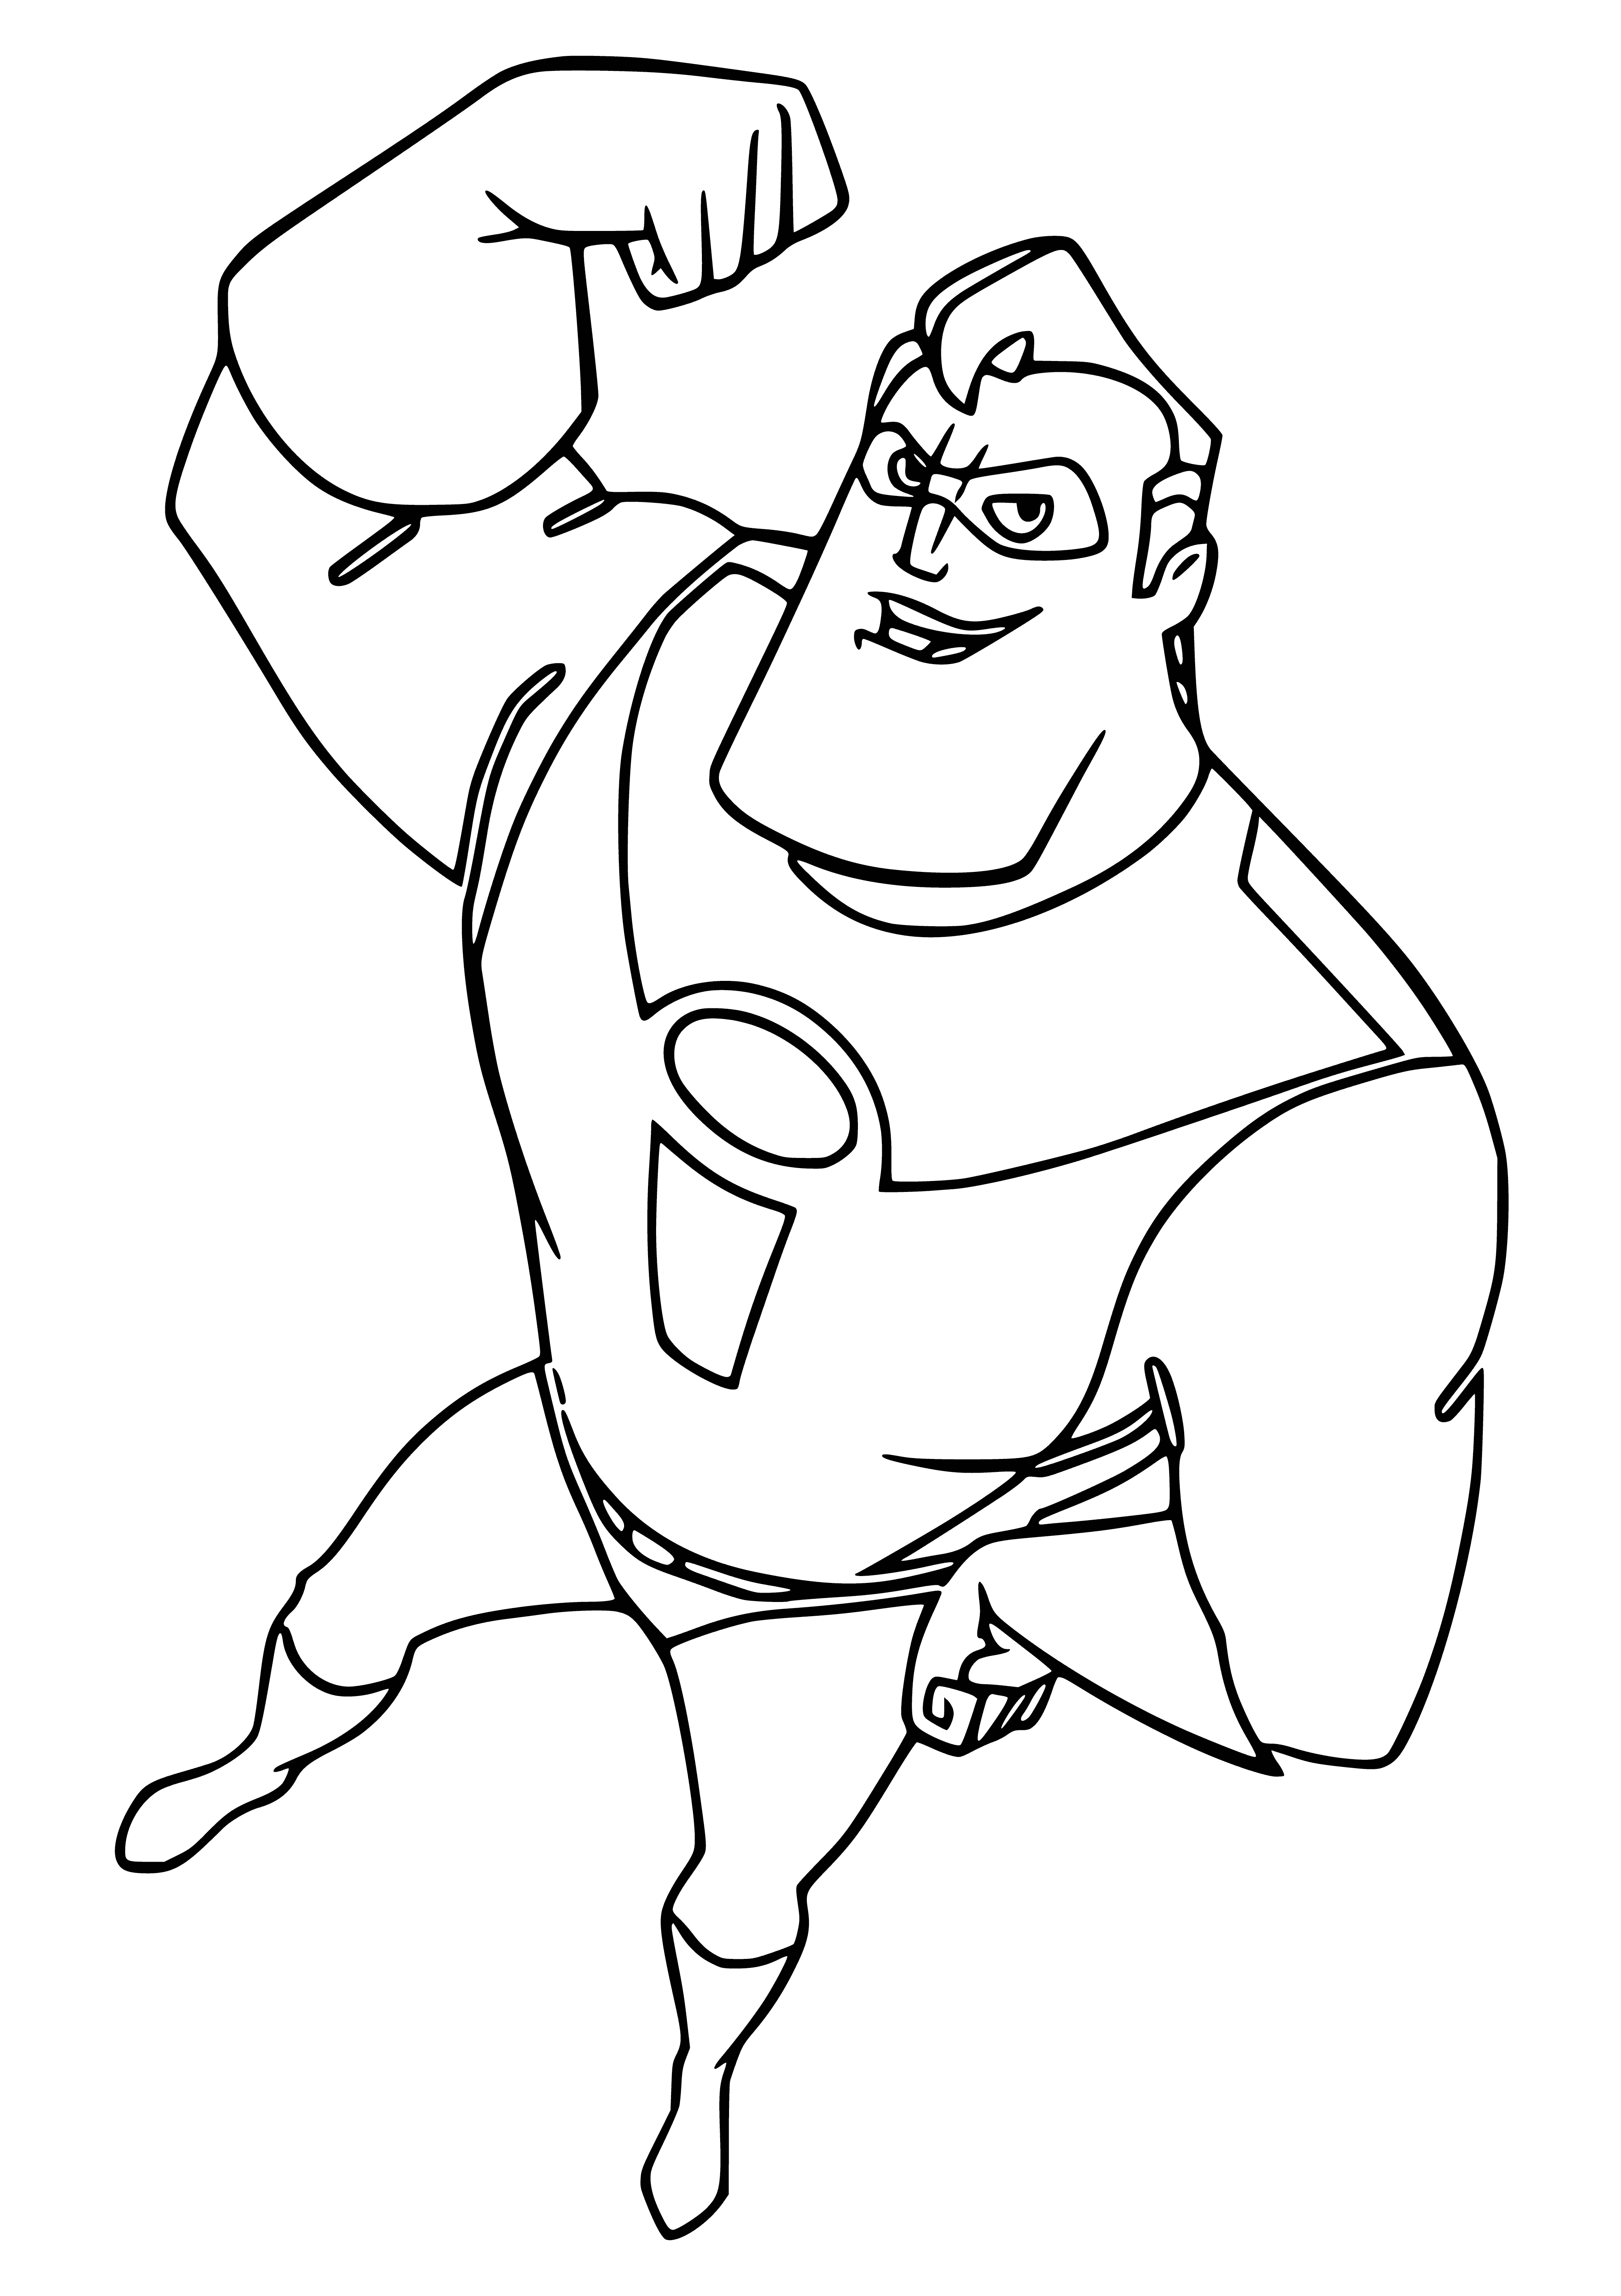 Super Hero Mister Exceptional coloring page